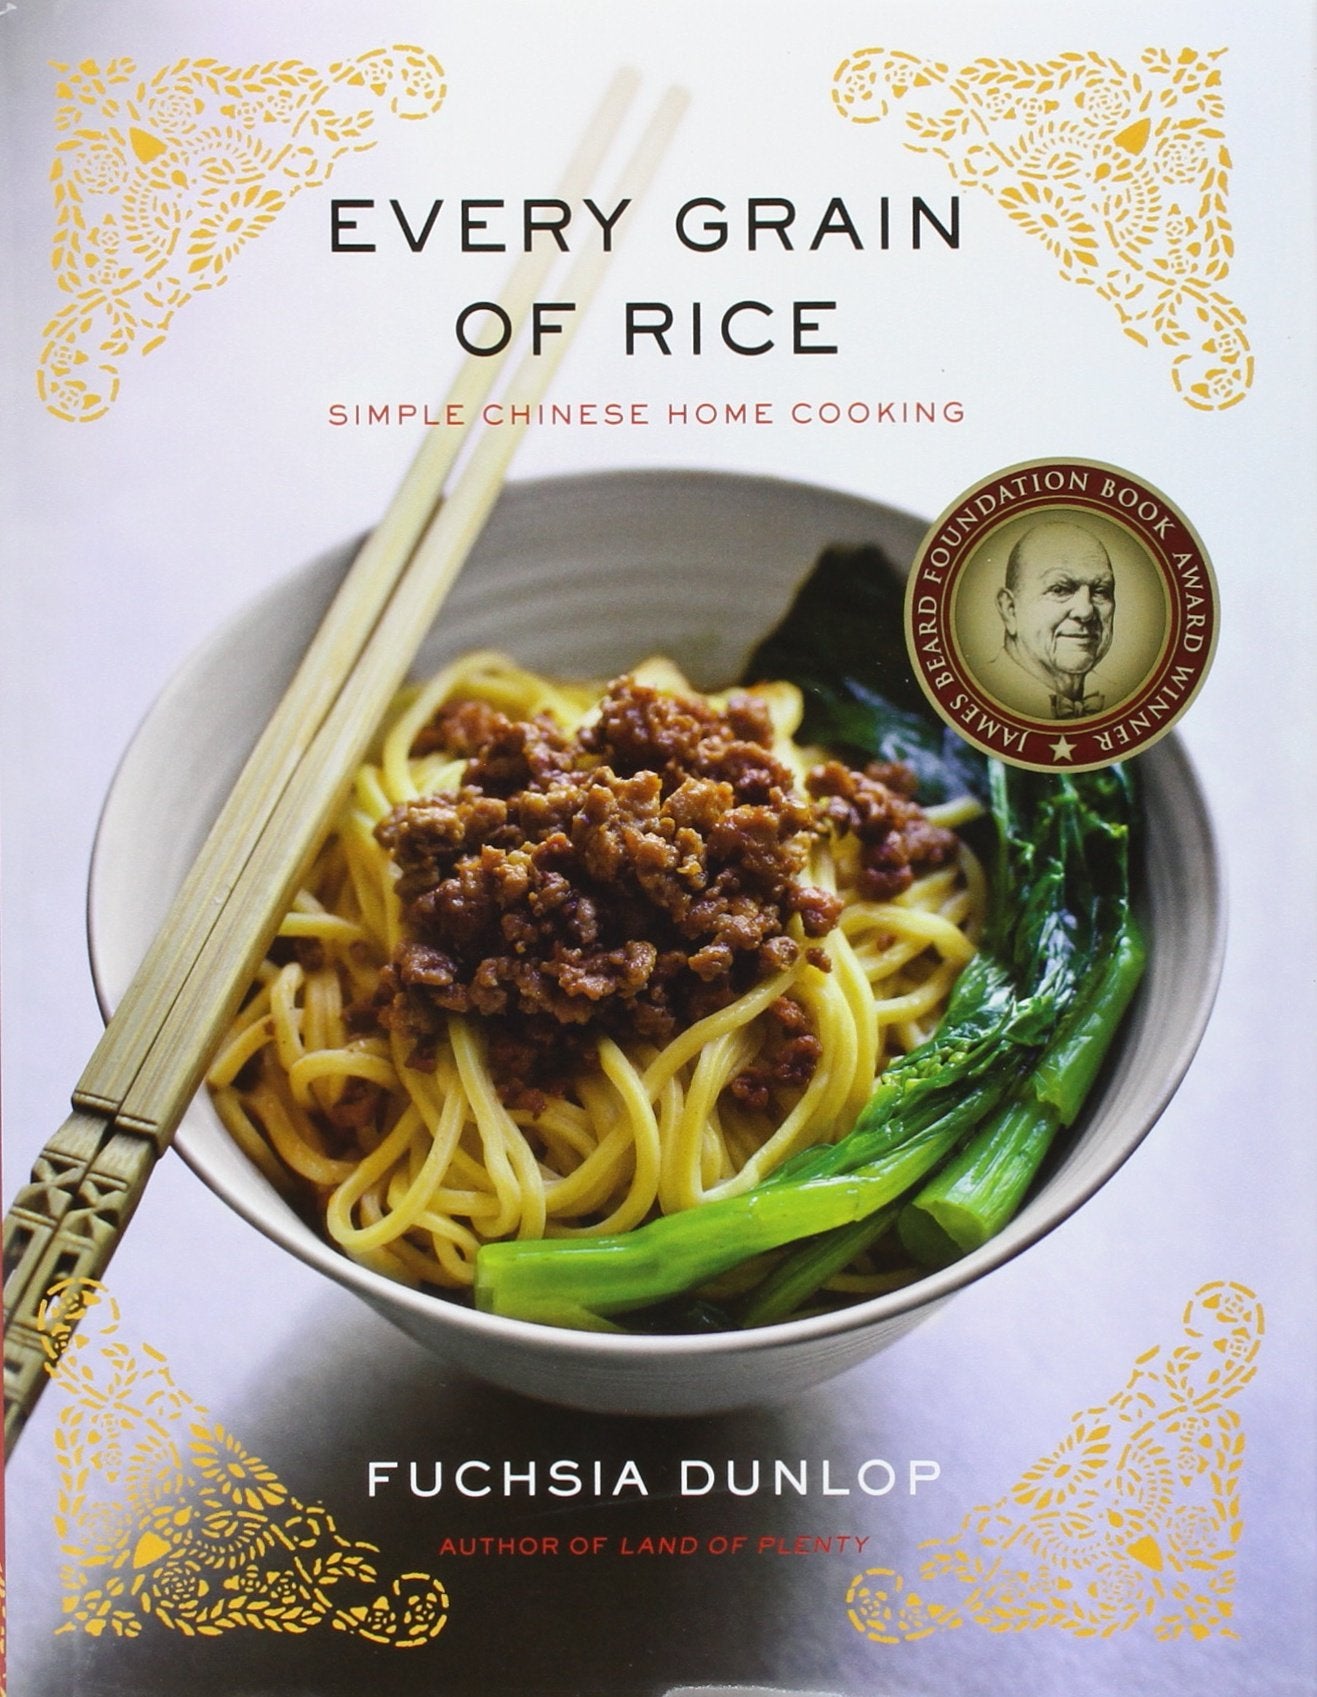 Every Grain of Rice: Simple Chinese Home Cooking (Fuchsia Dunlop)